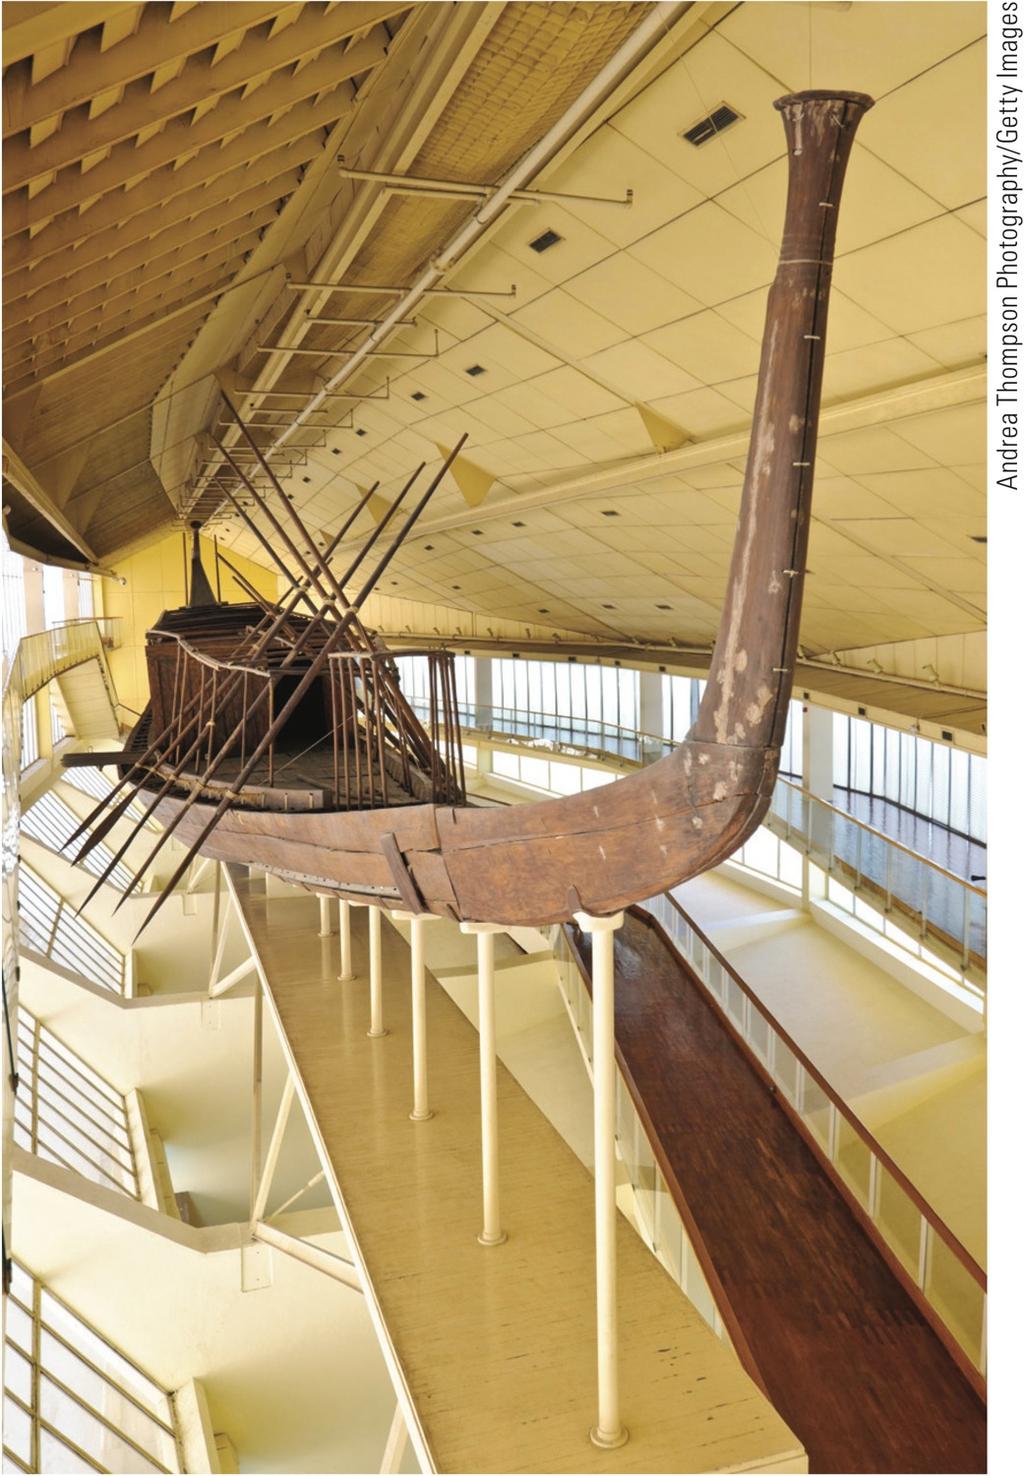 Solar Ship of King Khufu This full-size ship (143 feet [43.6 meters] long and 19.5 feet [5.9 meters] wide) was buried in a pit at the base of the Great Pyramid circa 2500 B.C.E.